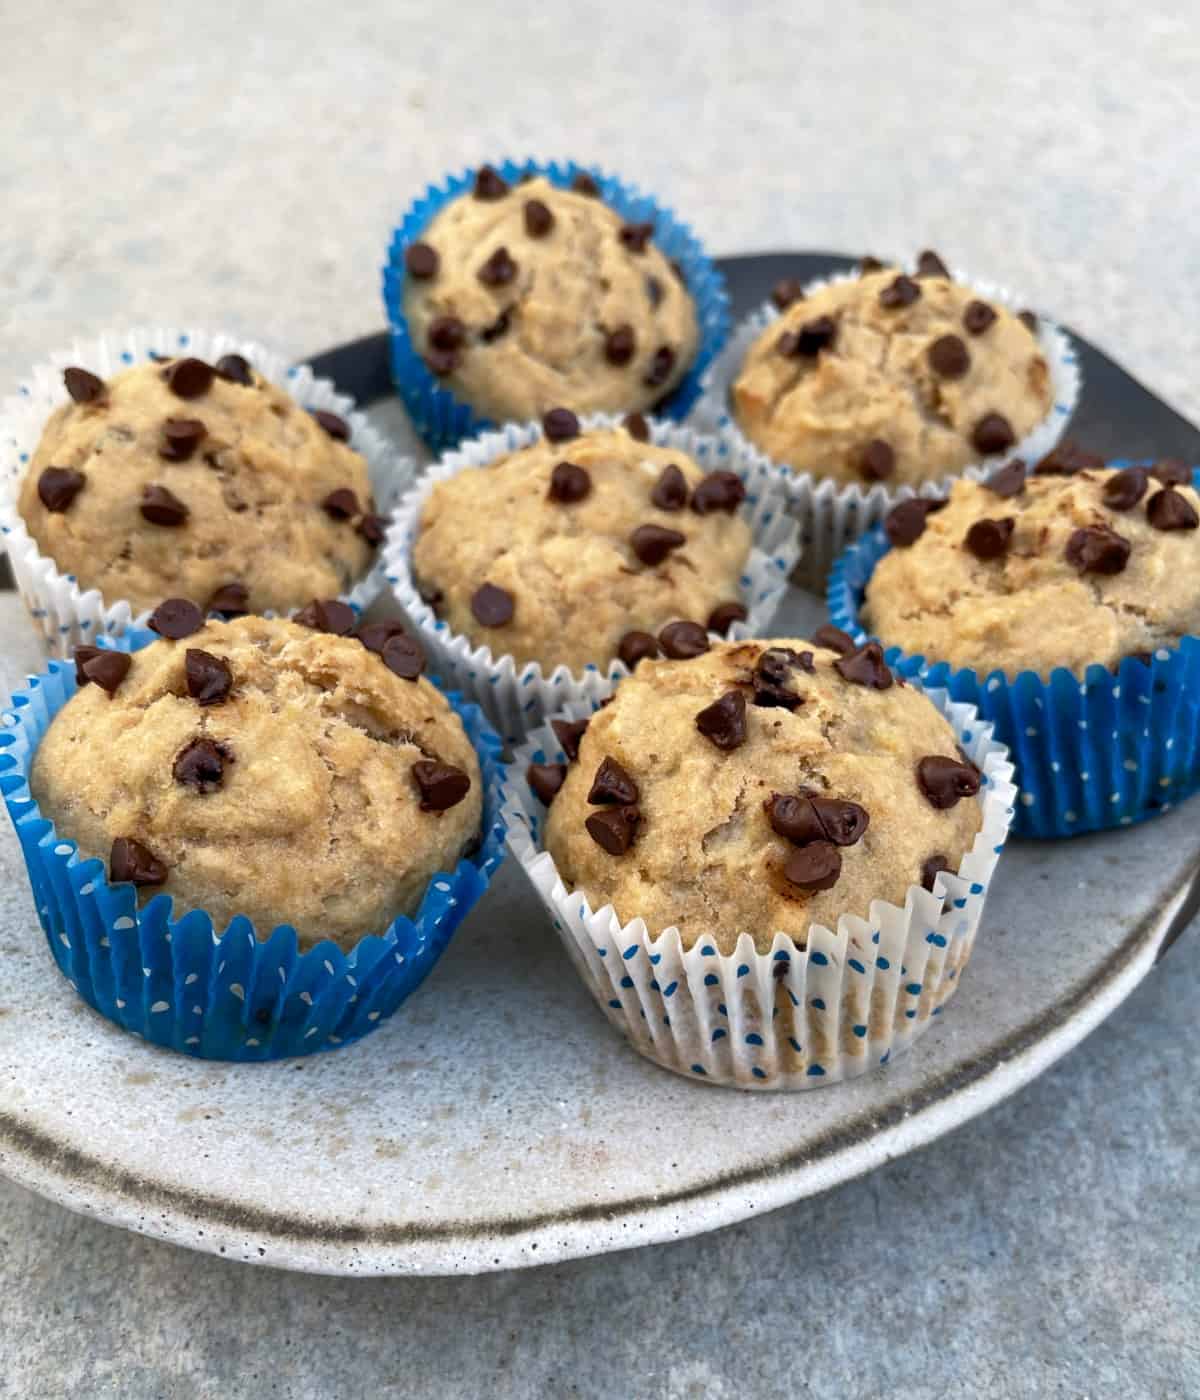 Banana chocolate chip muffins in blue and white paper liners on ceramic plate.